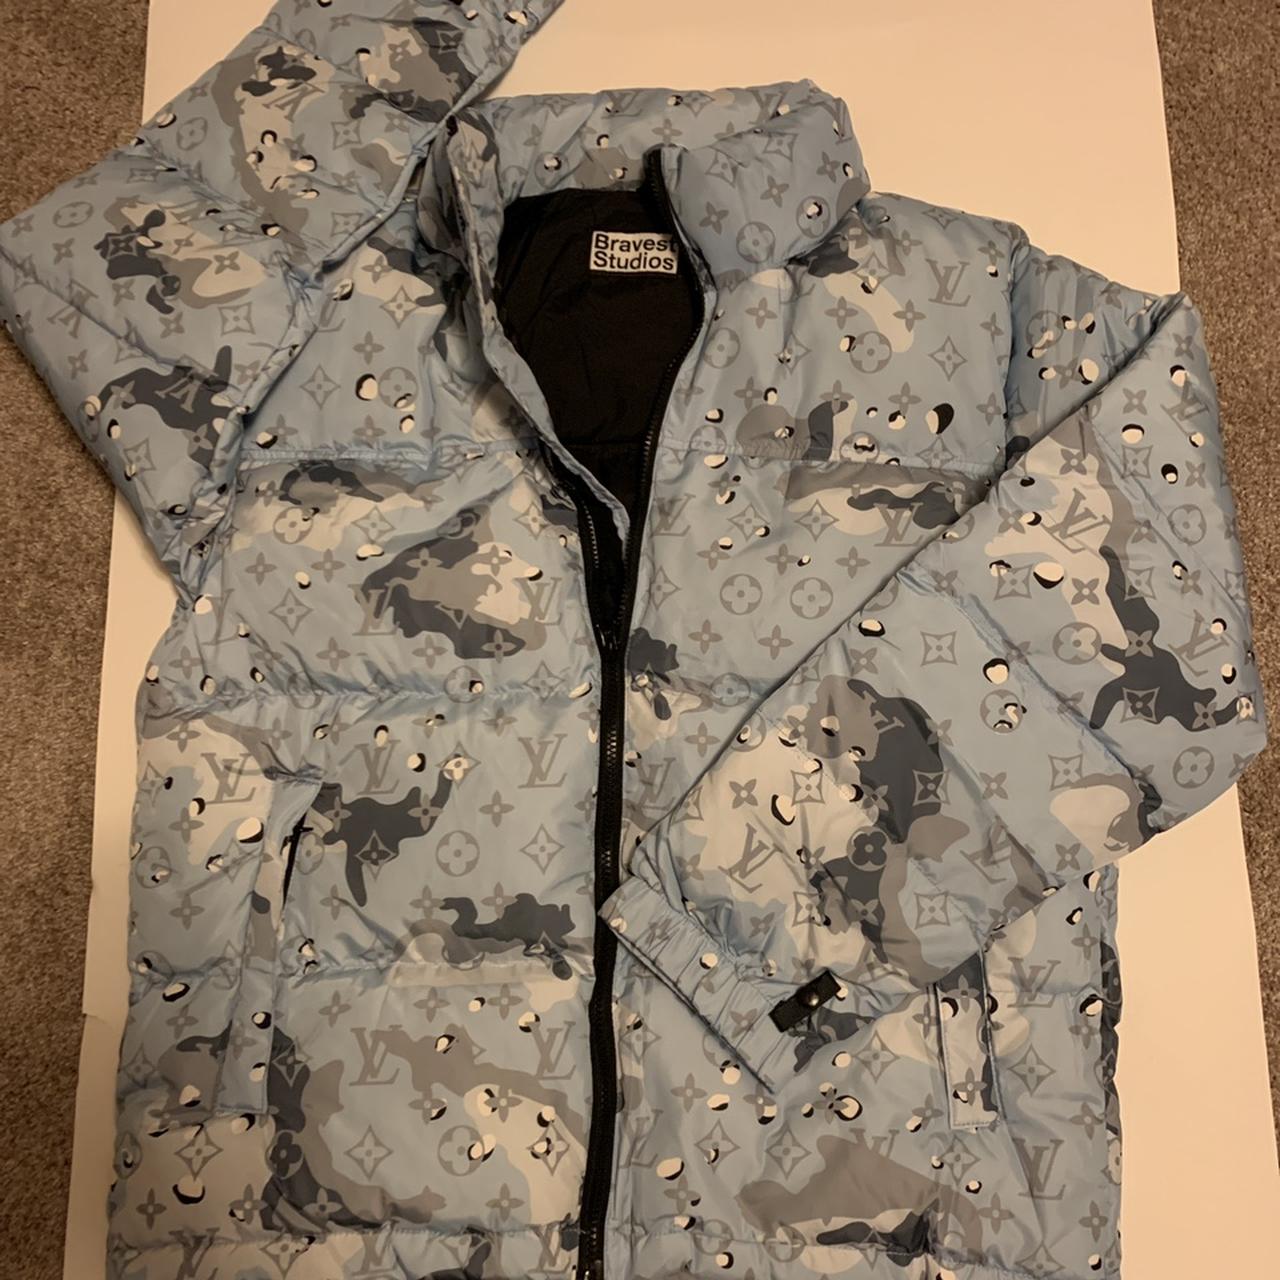 Bravest Studios LV Parka for Sale in Brooklyn, NY - OfferUp